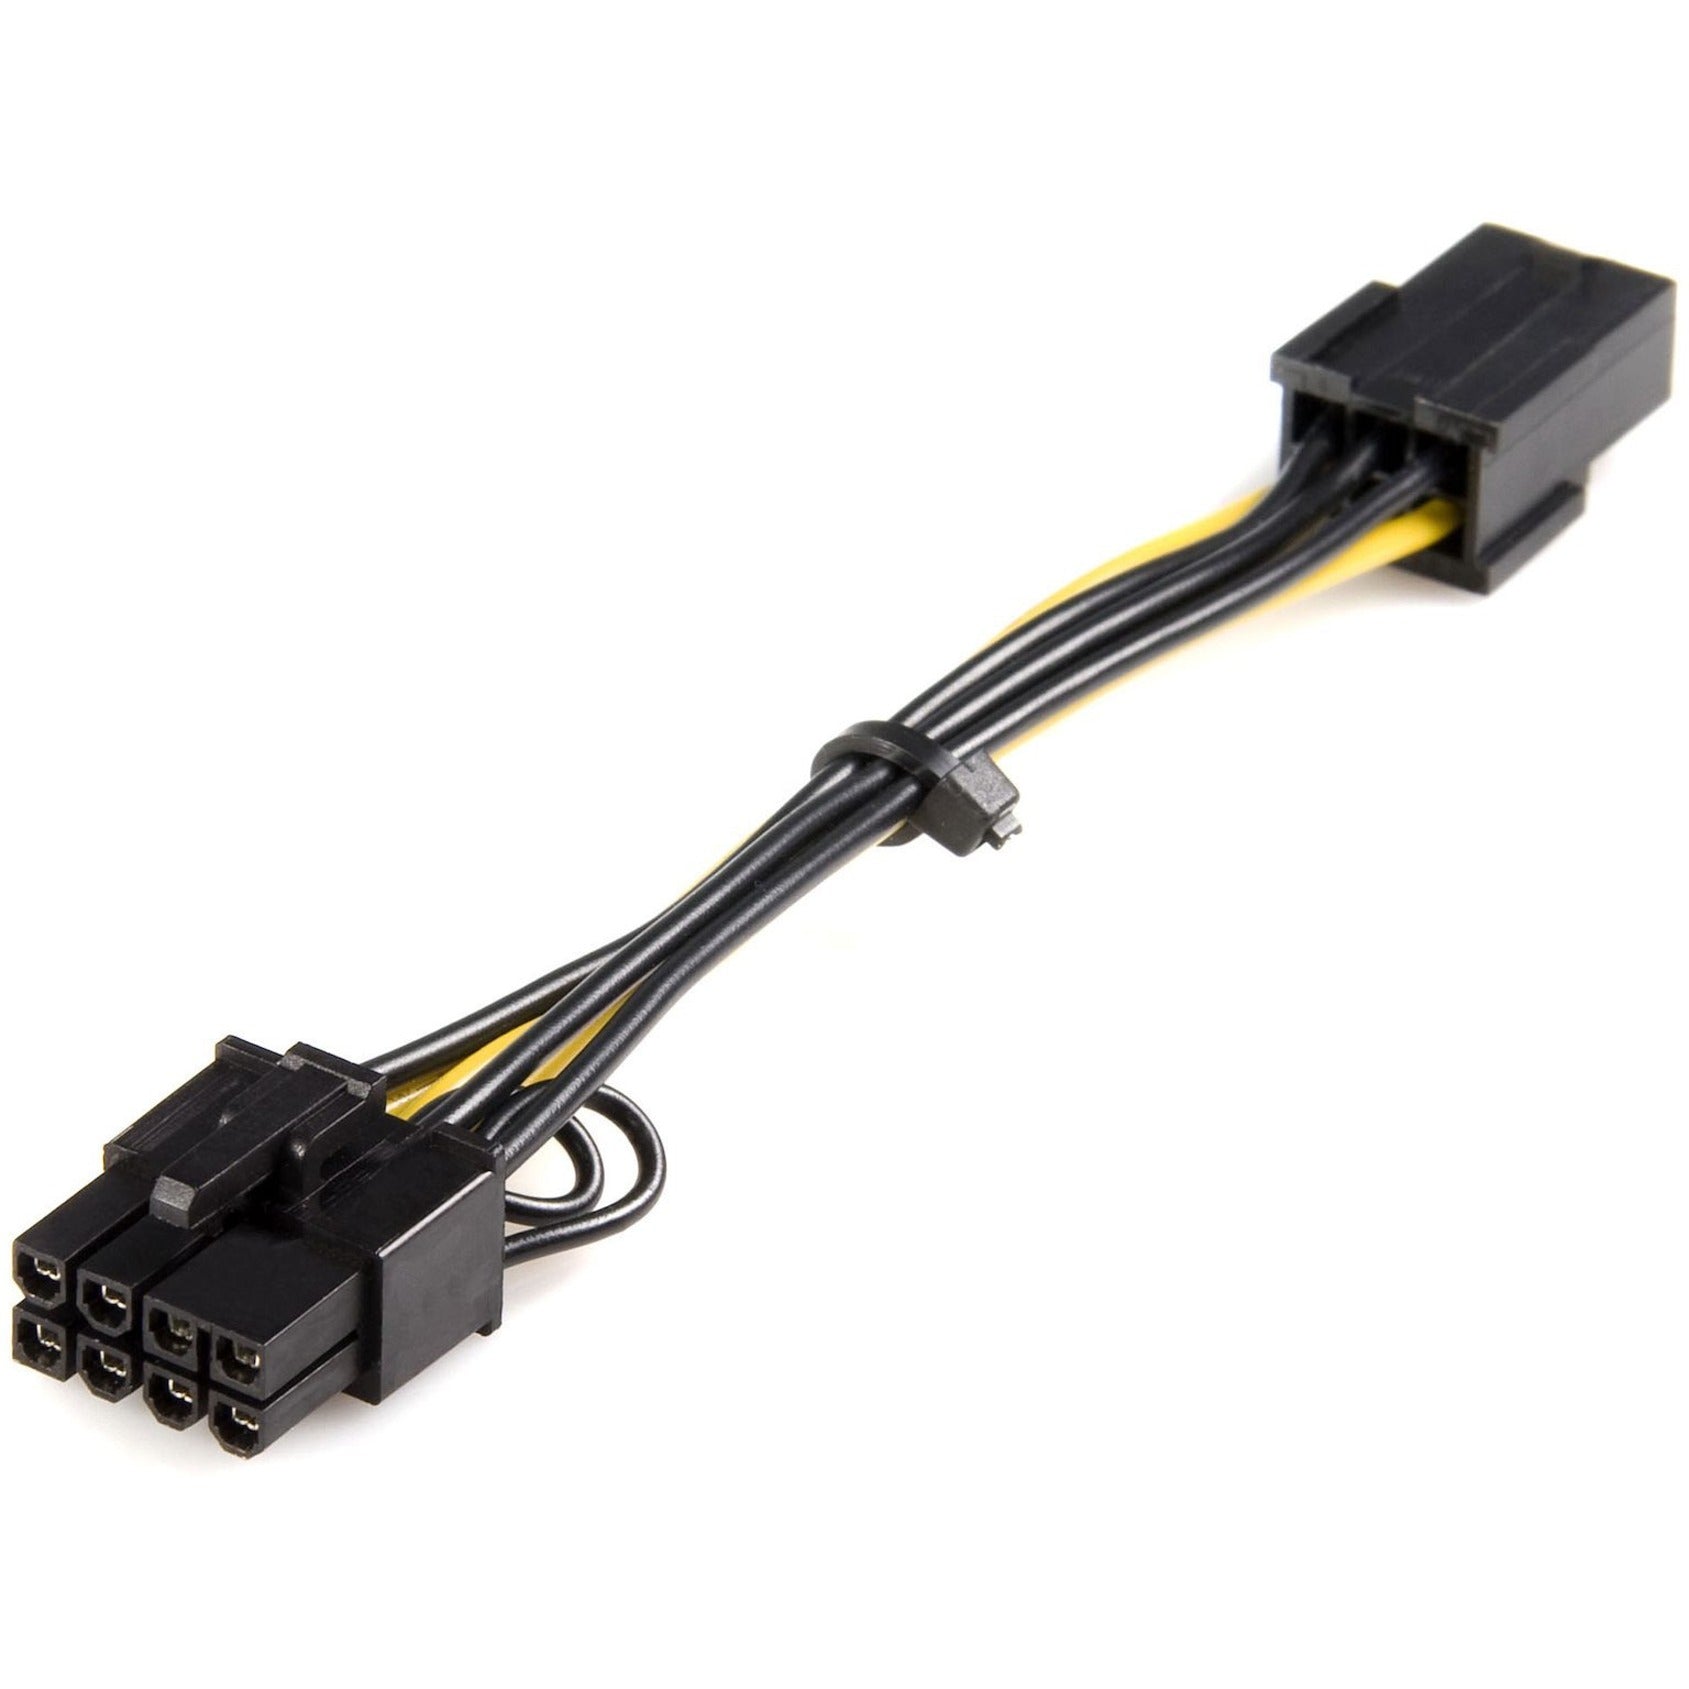 StarTech.com PCIEX68ADAP Power Adapter Cable - PCIe, 6 Pin to 8 Pin, Lifetime Warranty, RoHS Certified